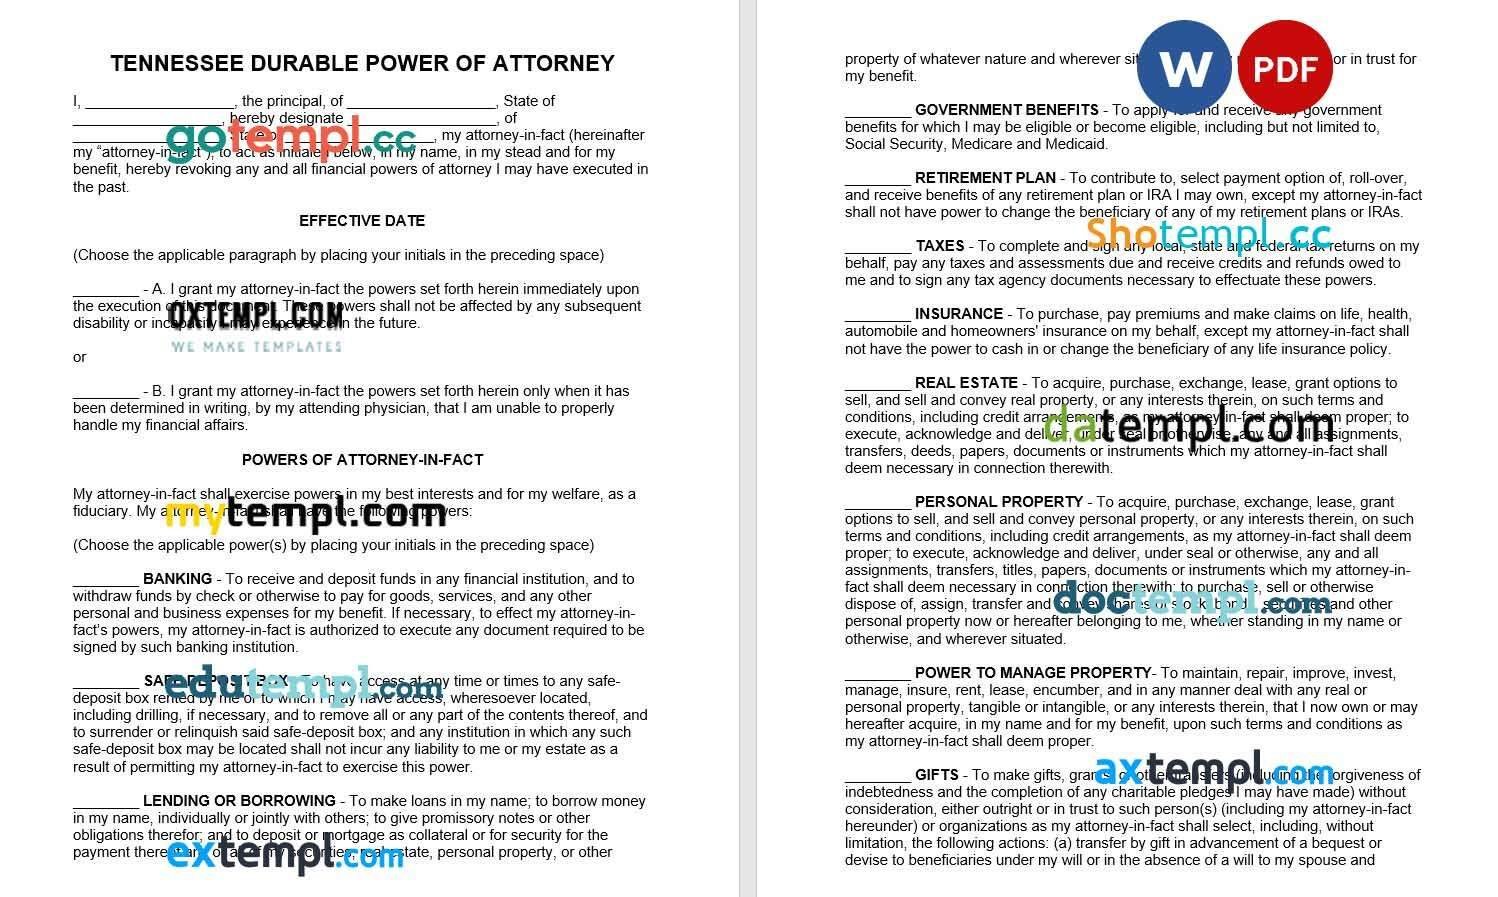 Tennessee Durable Financial Power of Attorney Form example, fully editable